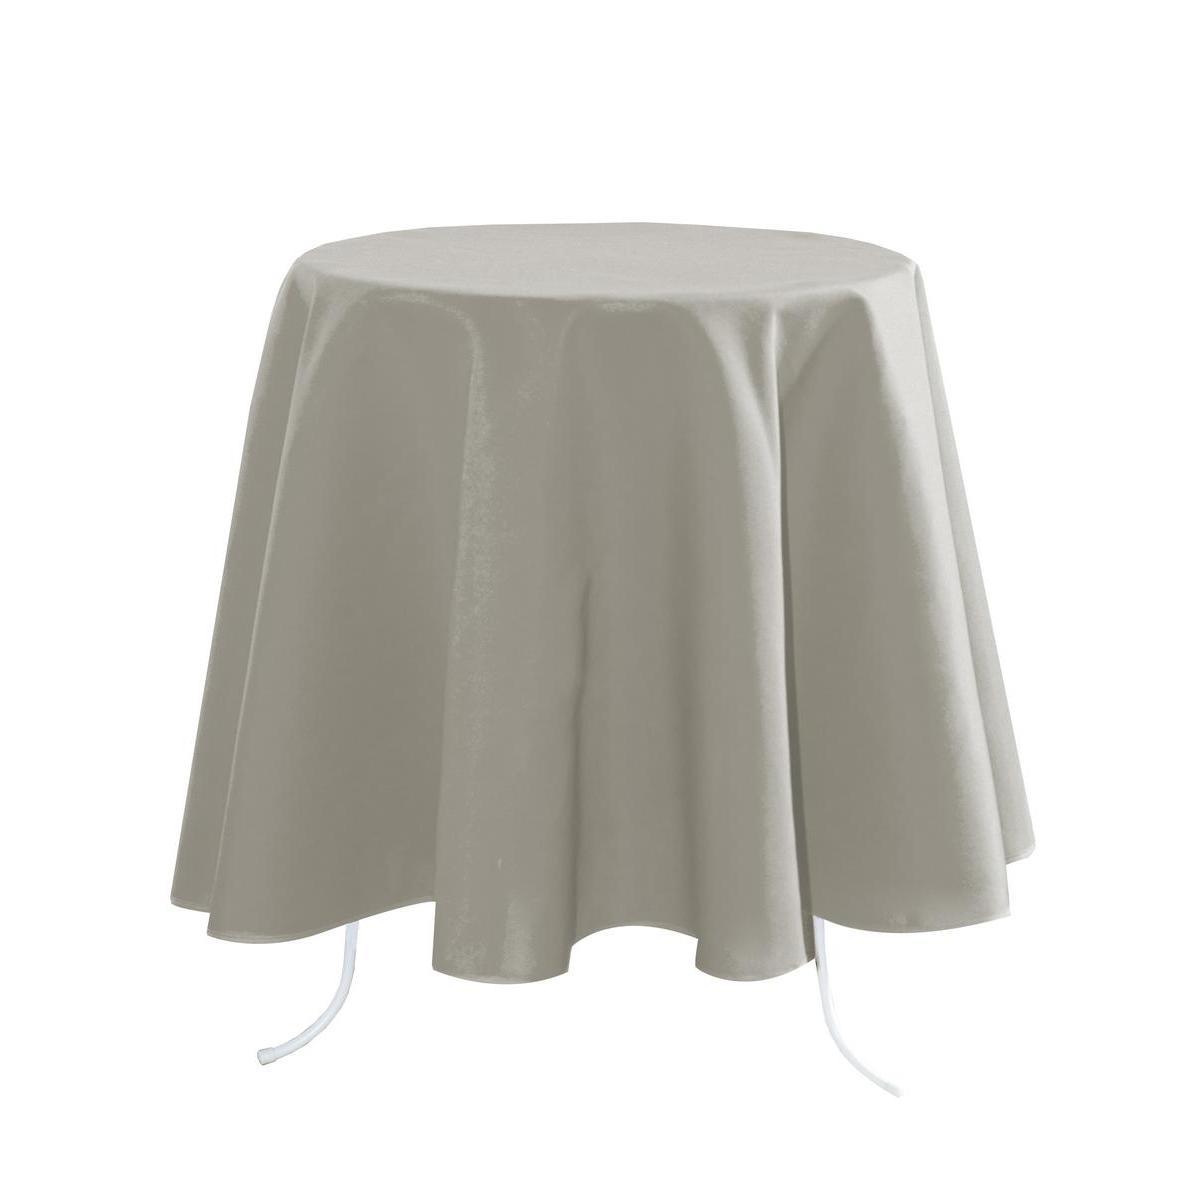 Nappe rectangulaire - 100 % Polyester - 148 x 240 cm - Beige